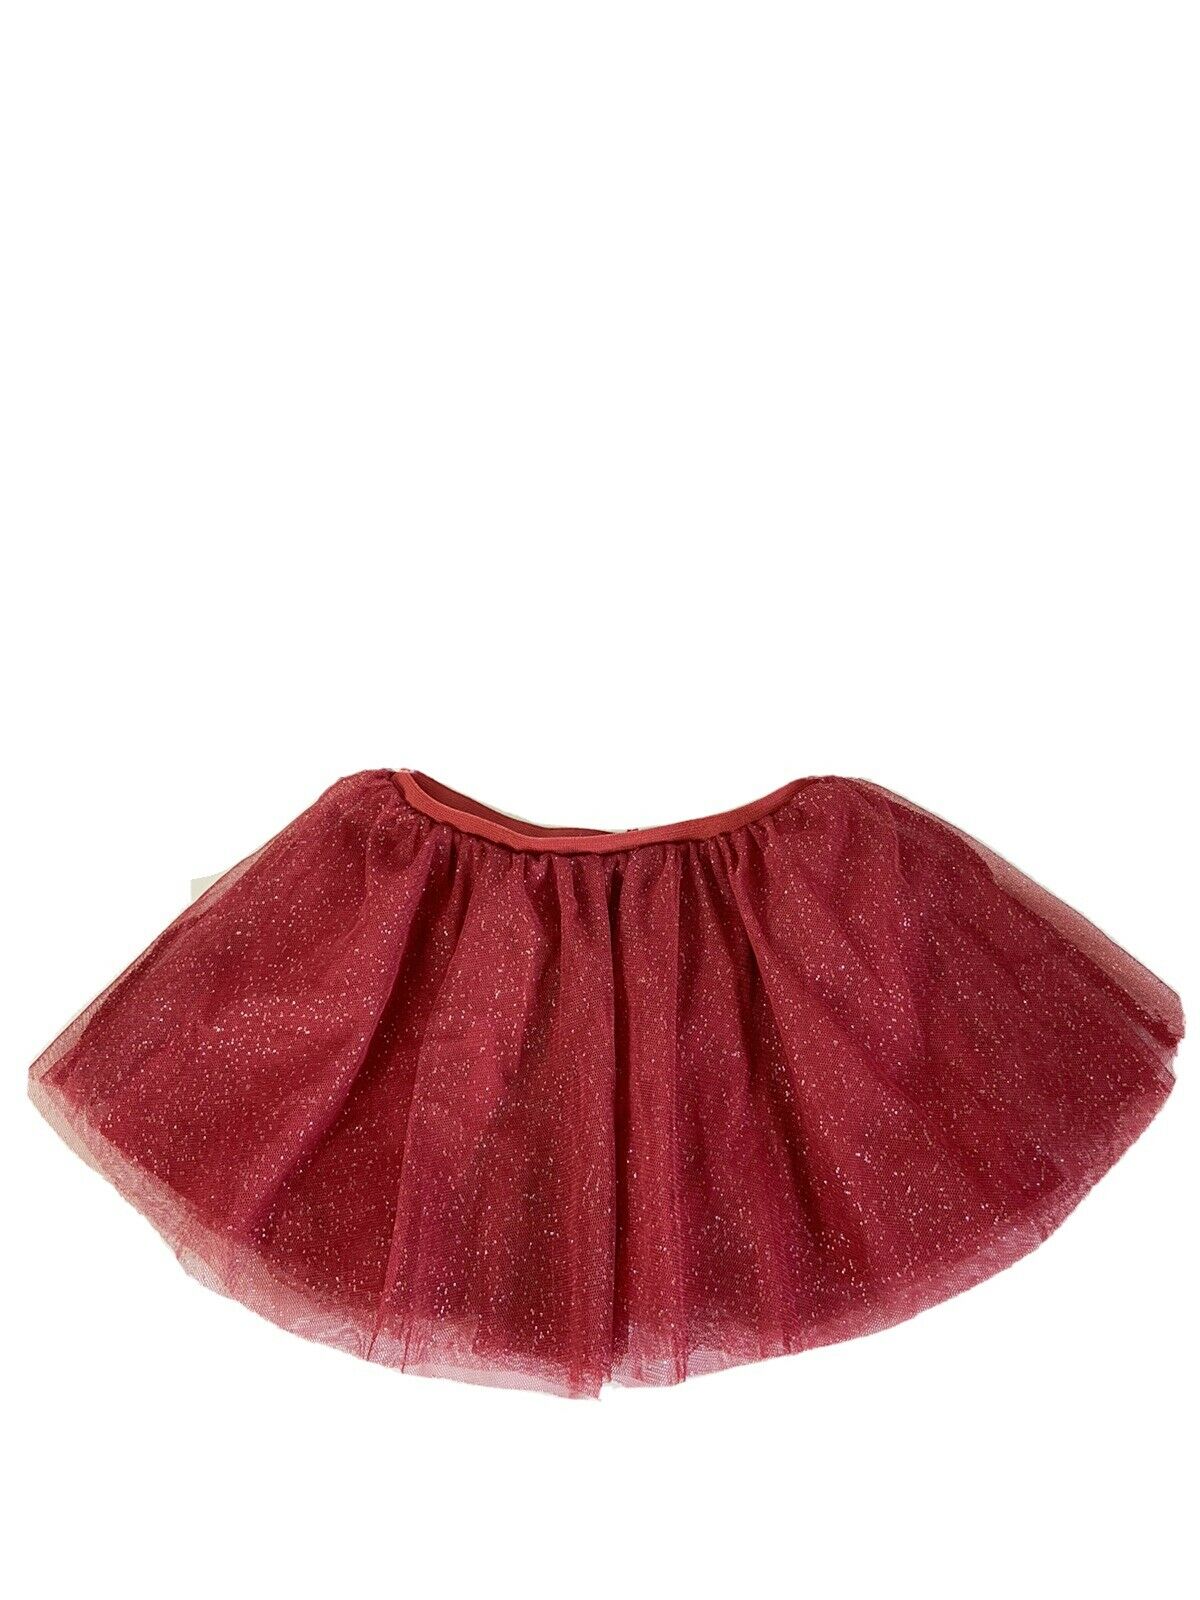 Zara Skirt Girls Sz 12/18 Months Glitter Tulle Party Red Cranberry Holiday Nwt